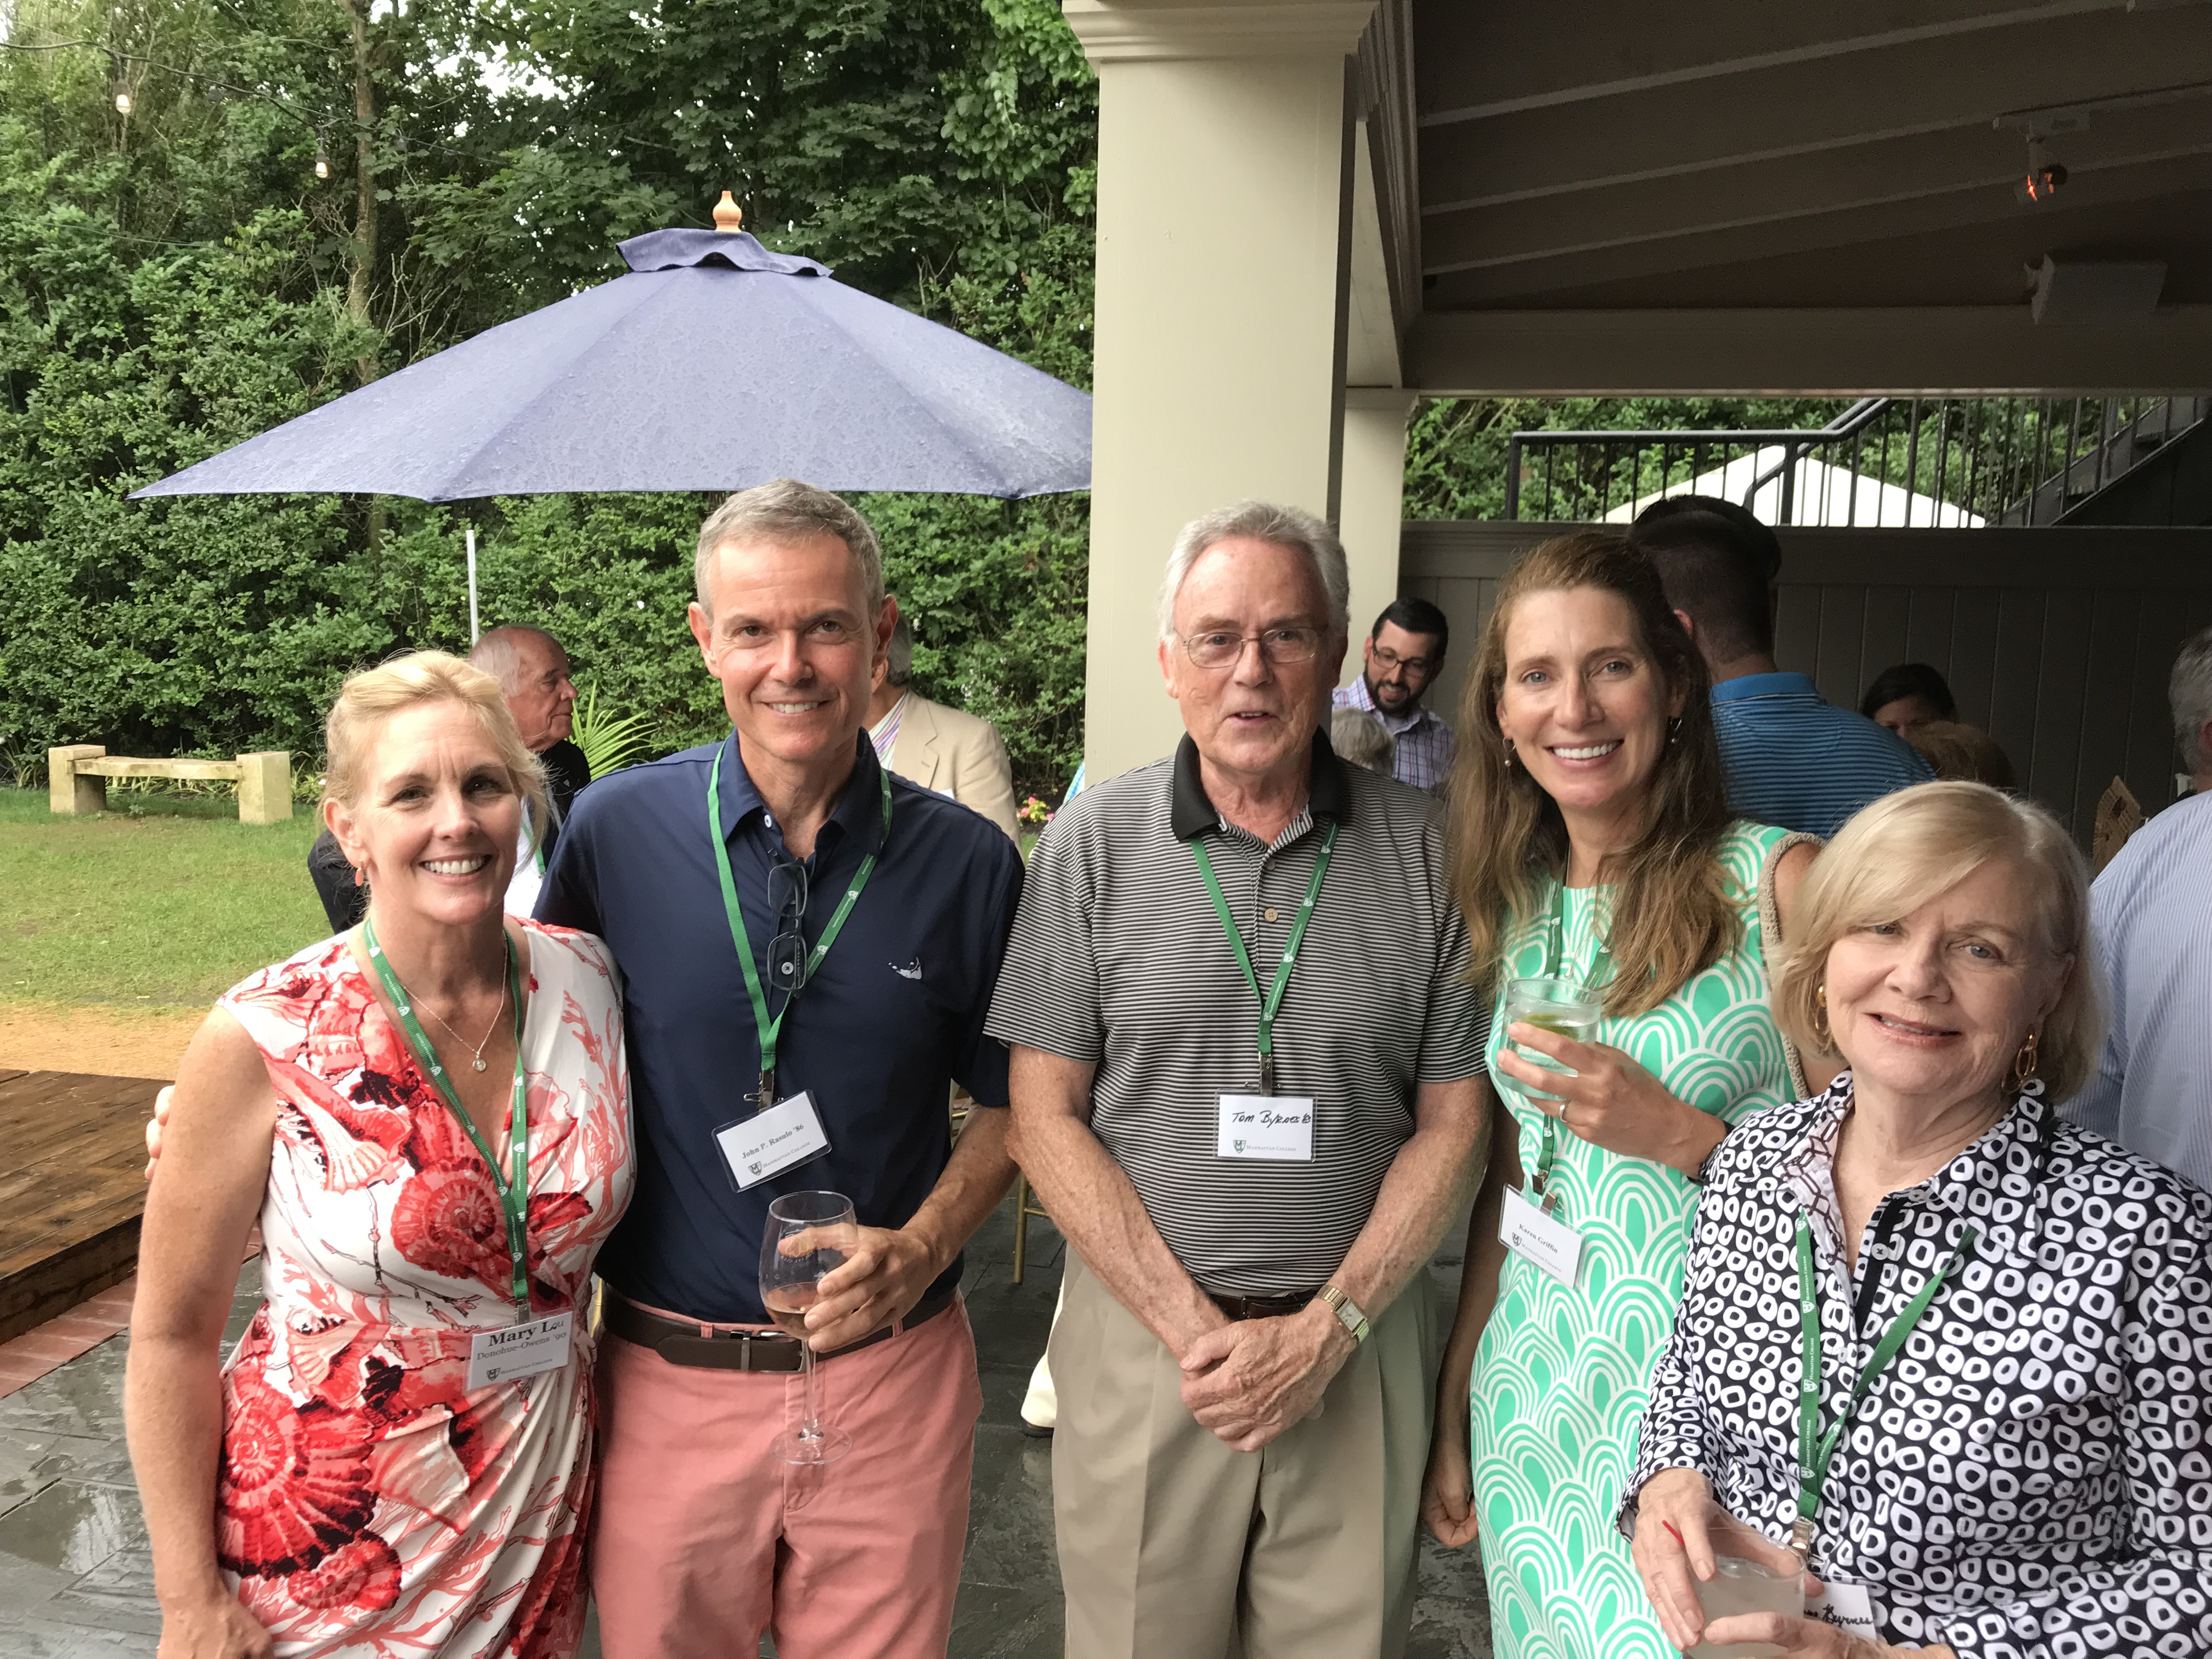 A Day in the Hamptons Alumni Reception